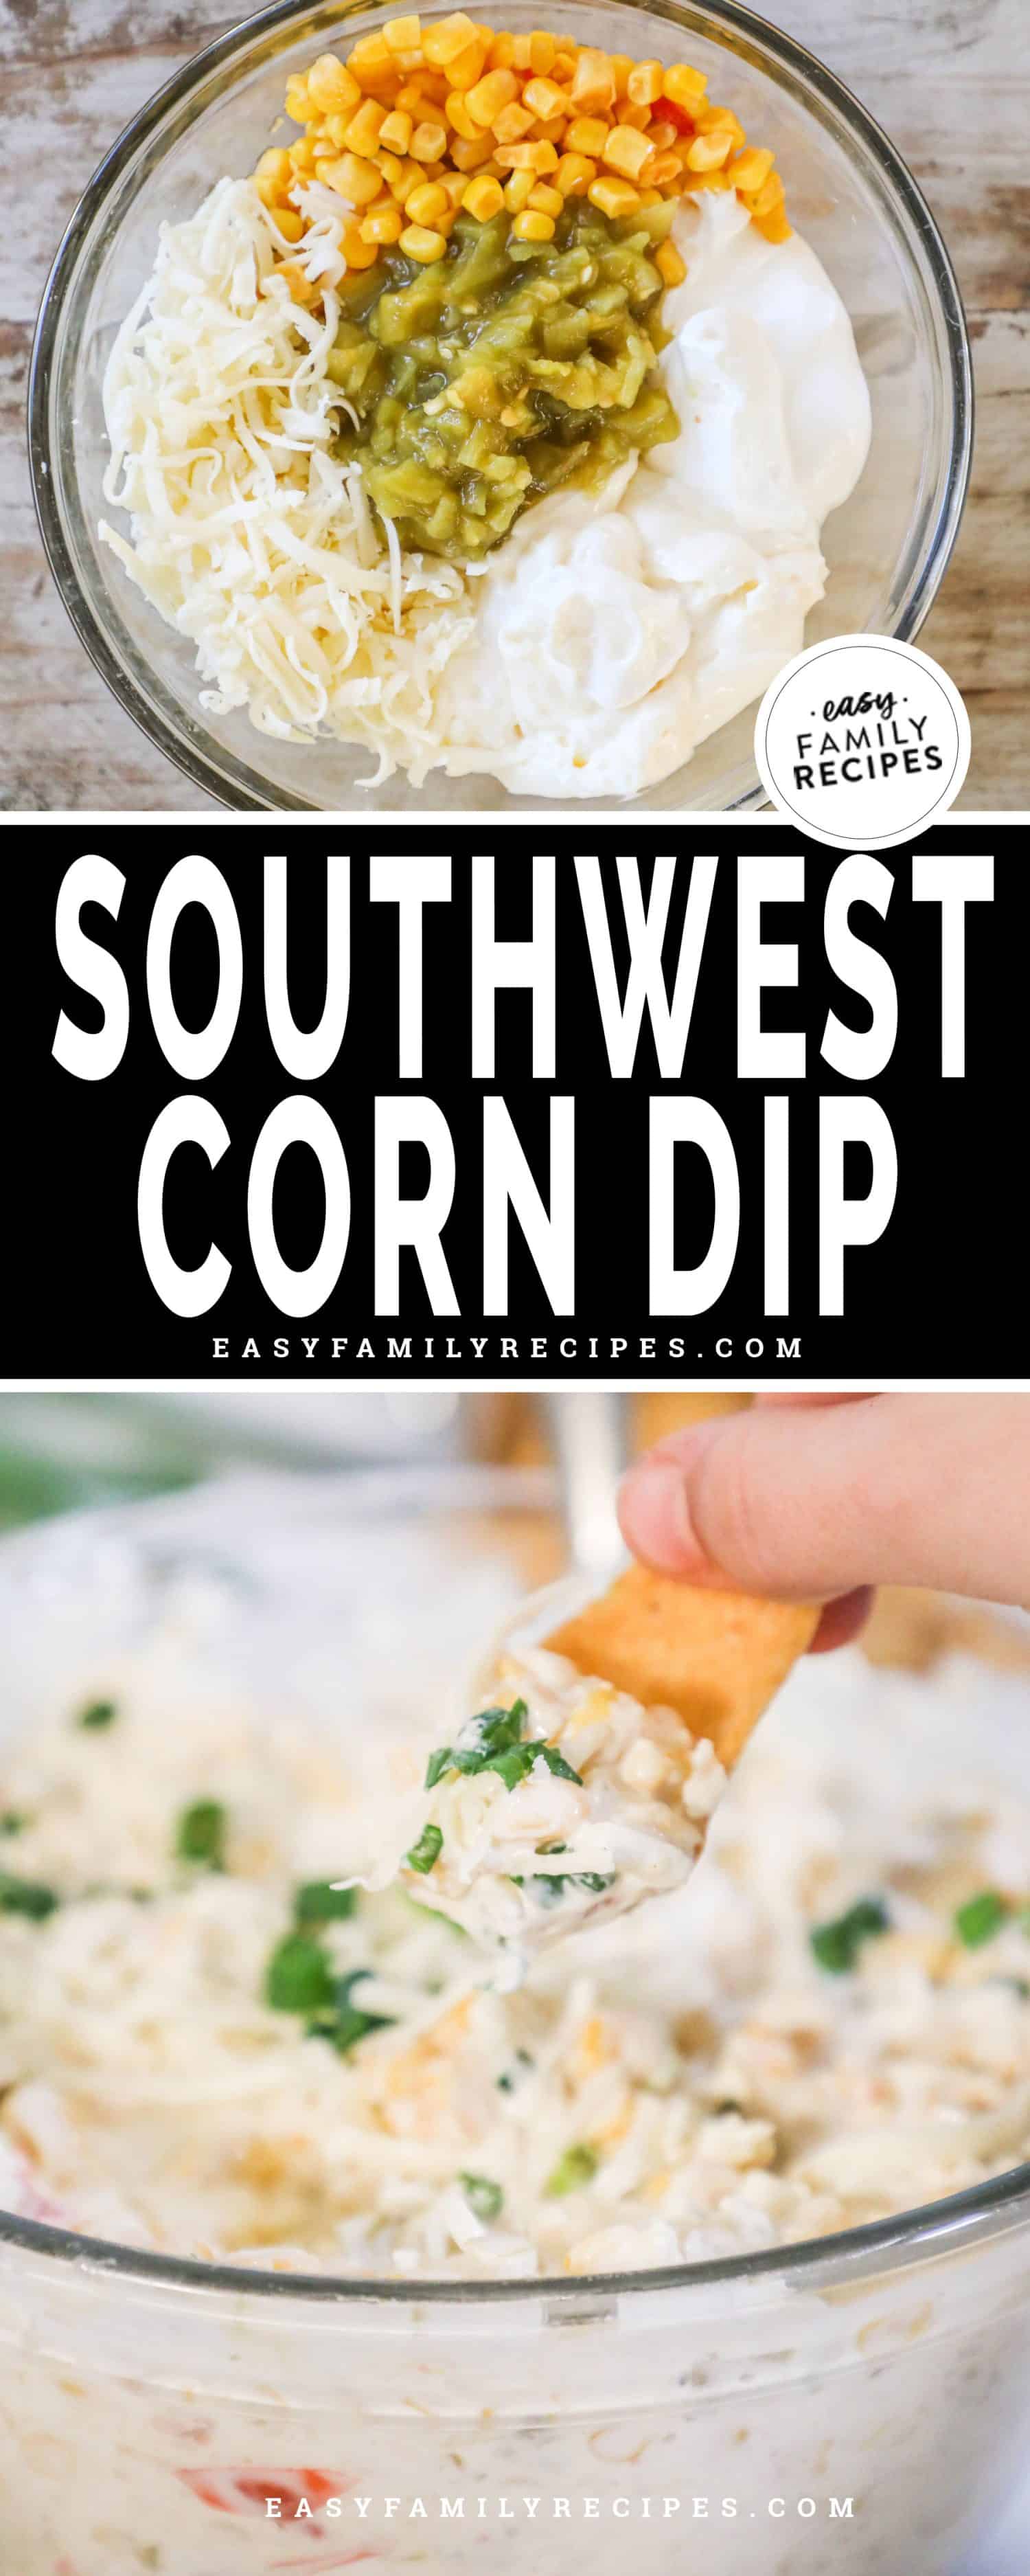 two photos of dip, a mixing bowl with dip ingredients and a chip being dipped into a bowl of finished corn dip.